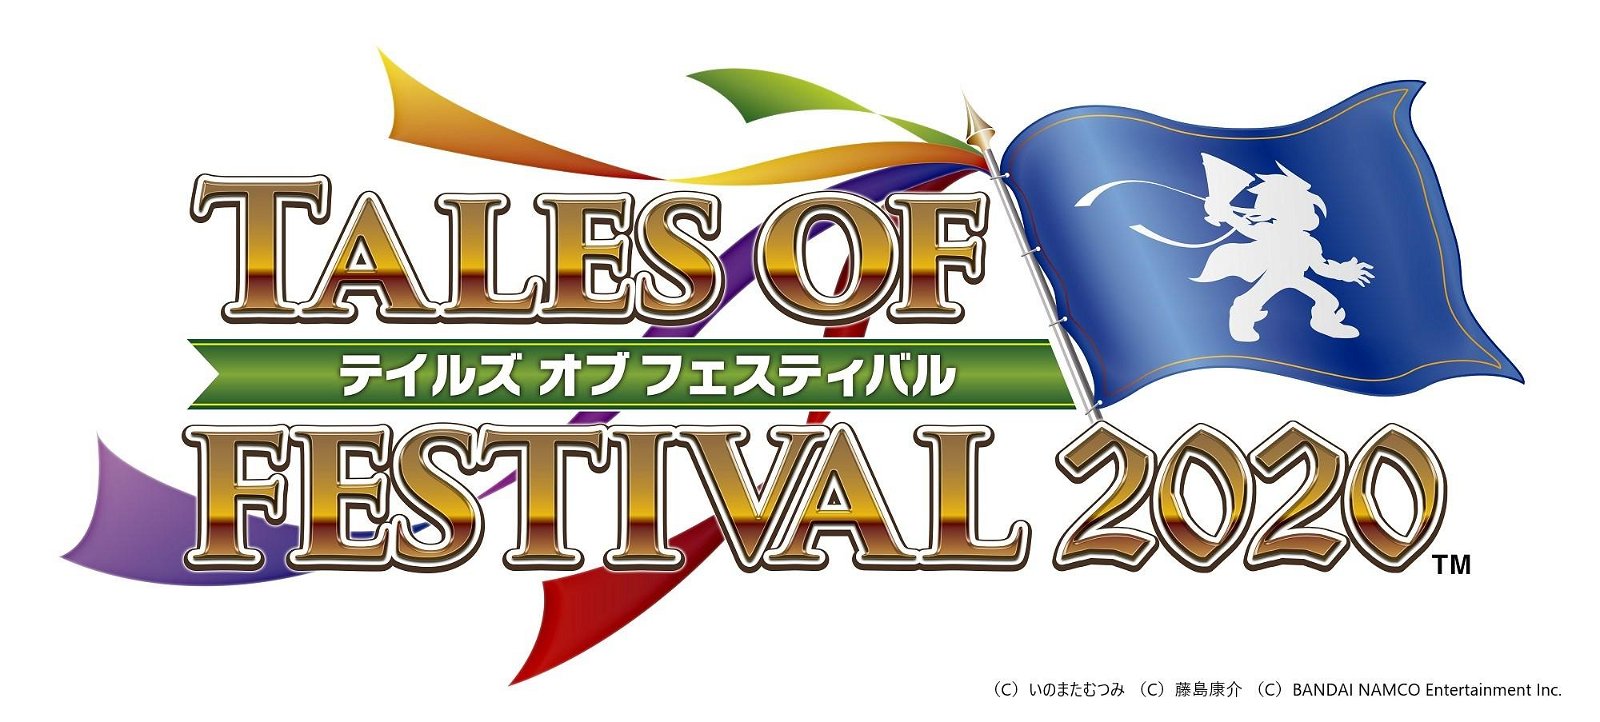 Tales of Festival 2020, annunciate le date